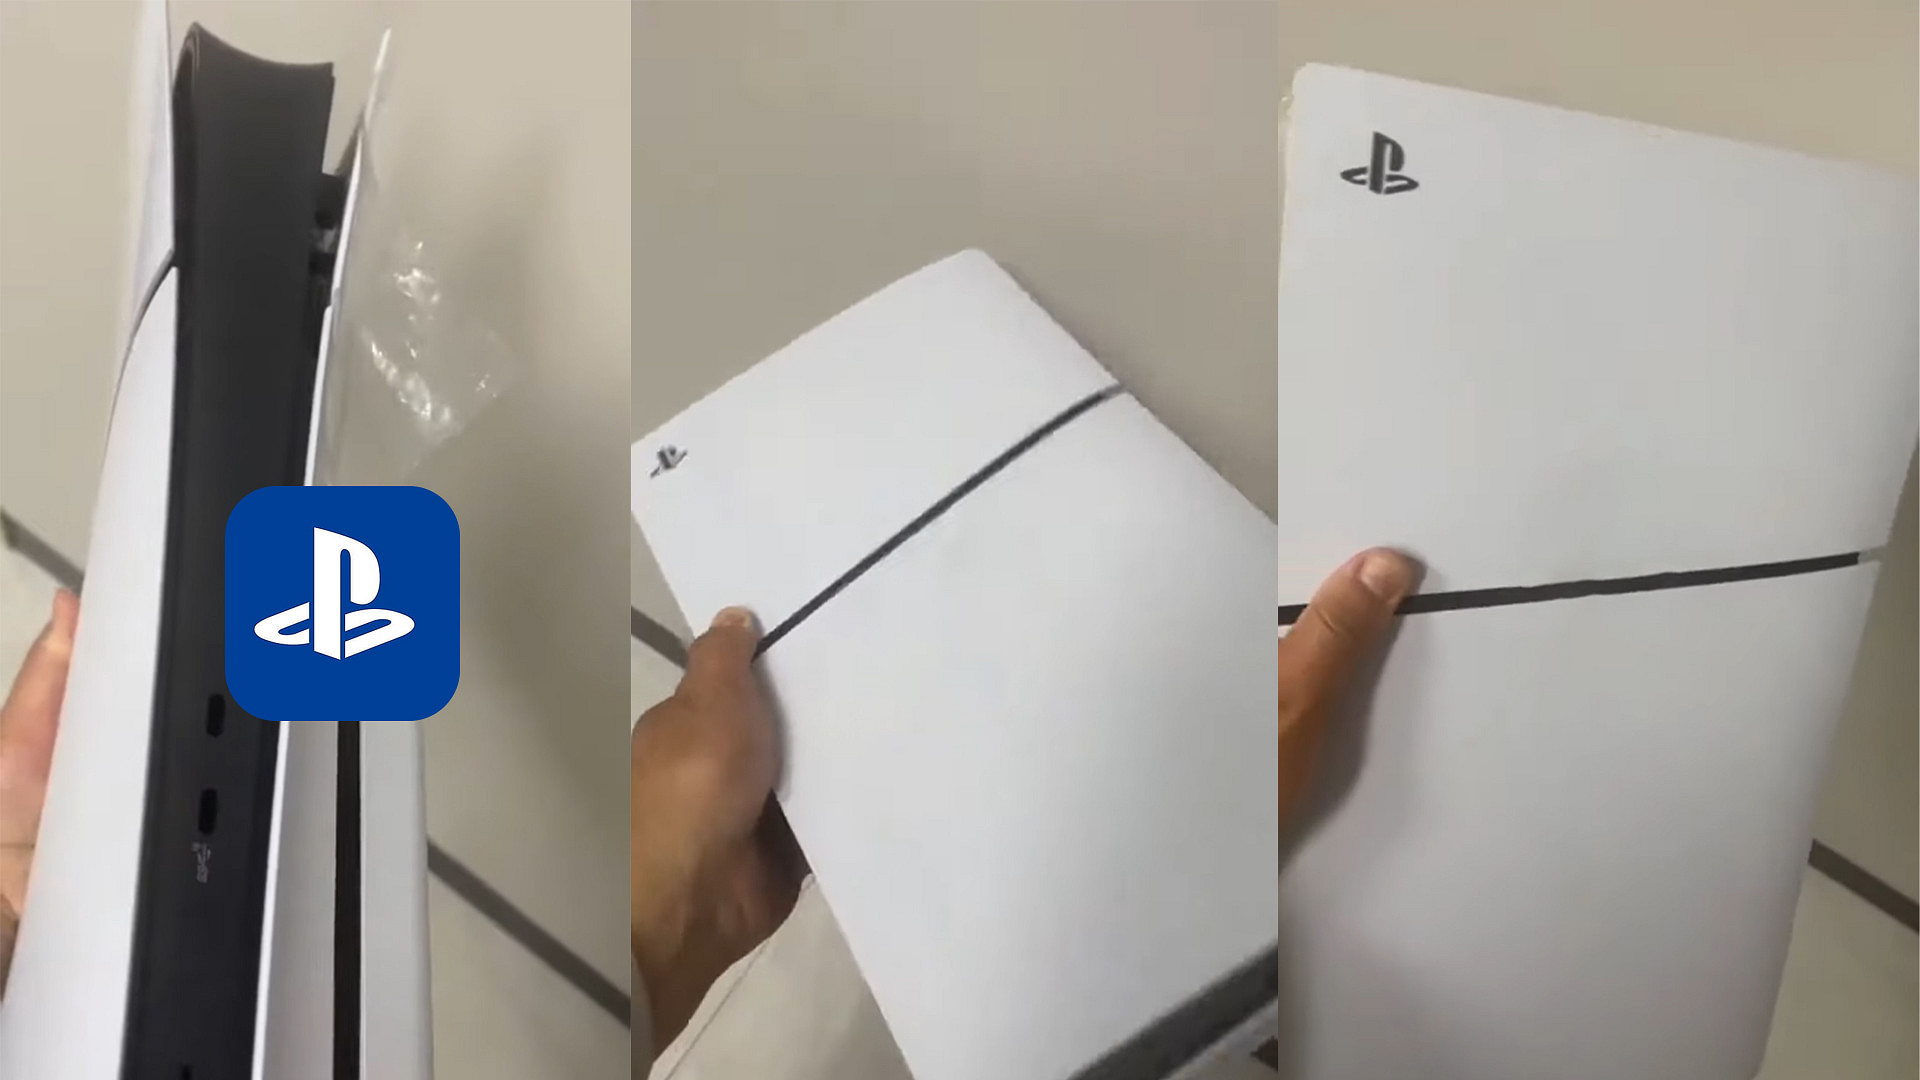 Everything We Know About the PS5 Pro - Specs, Release Date, Price